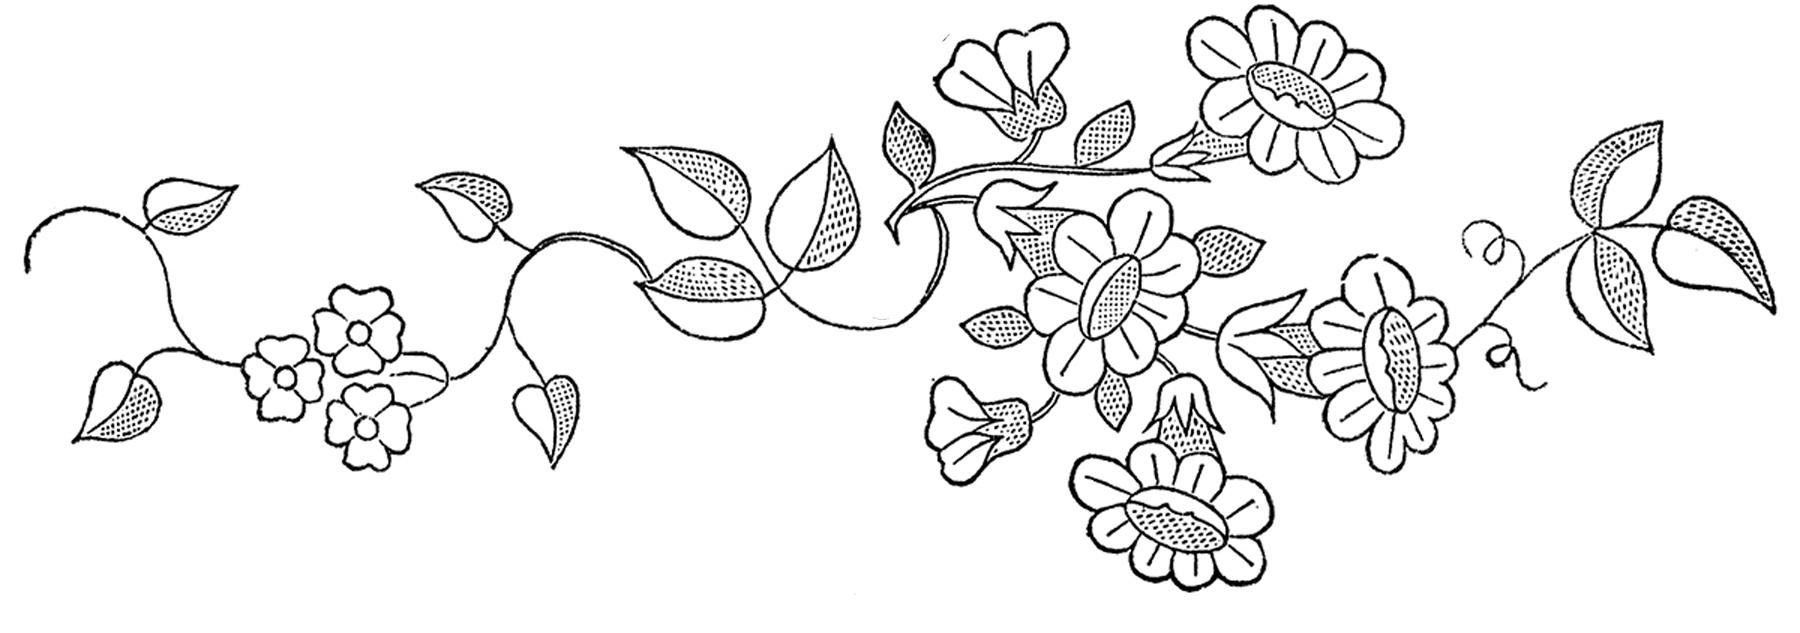 Patterns For Embroidery Hand Embroidery Patterns Digitemb